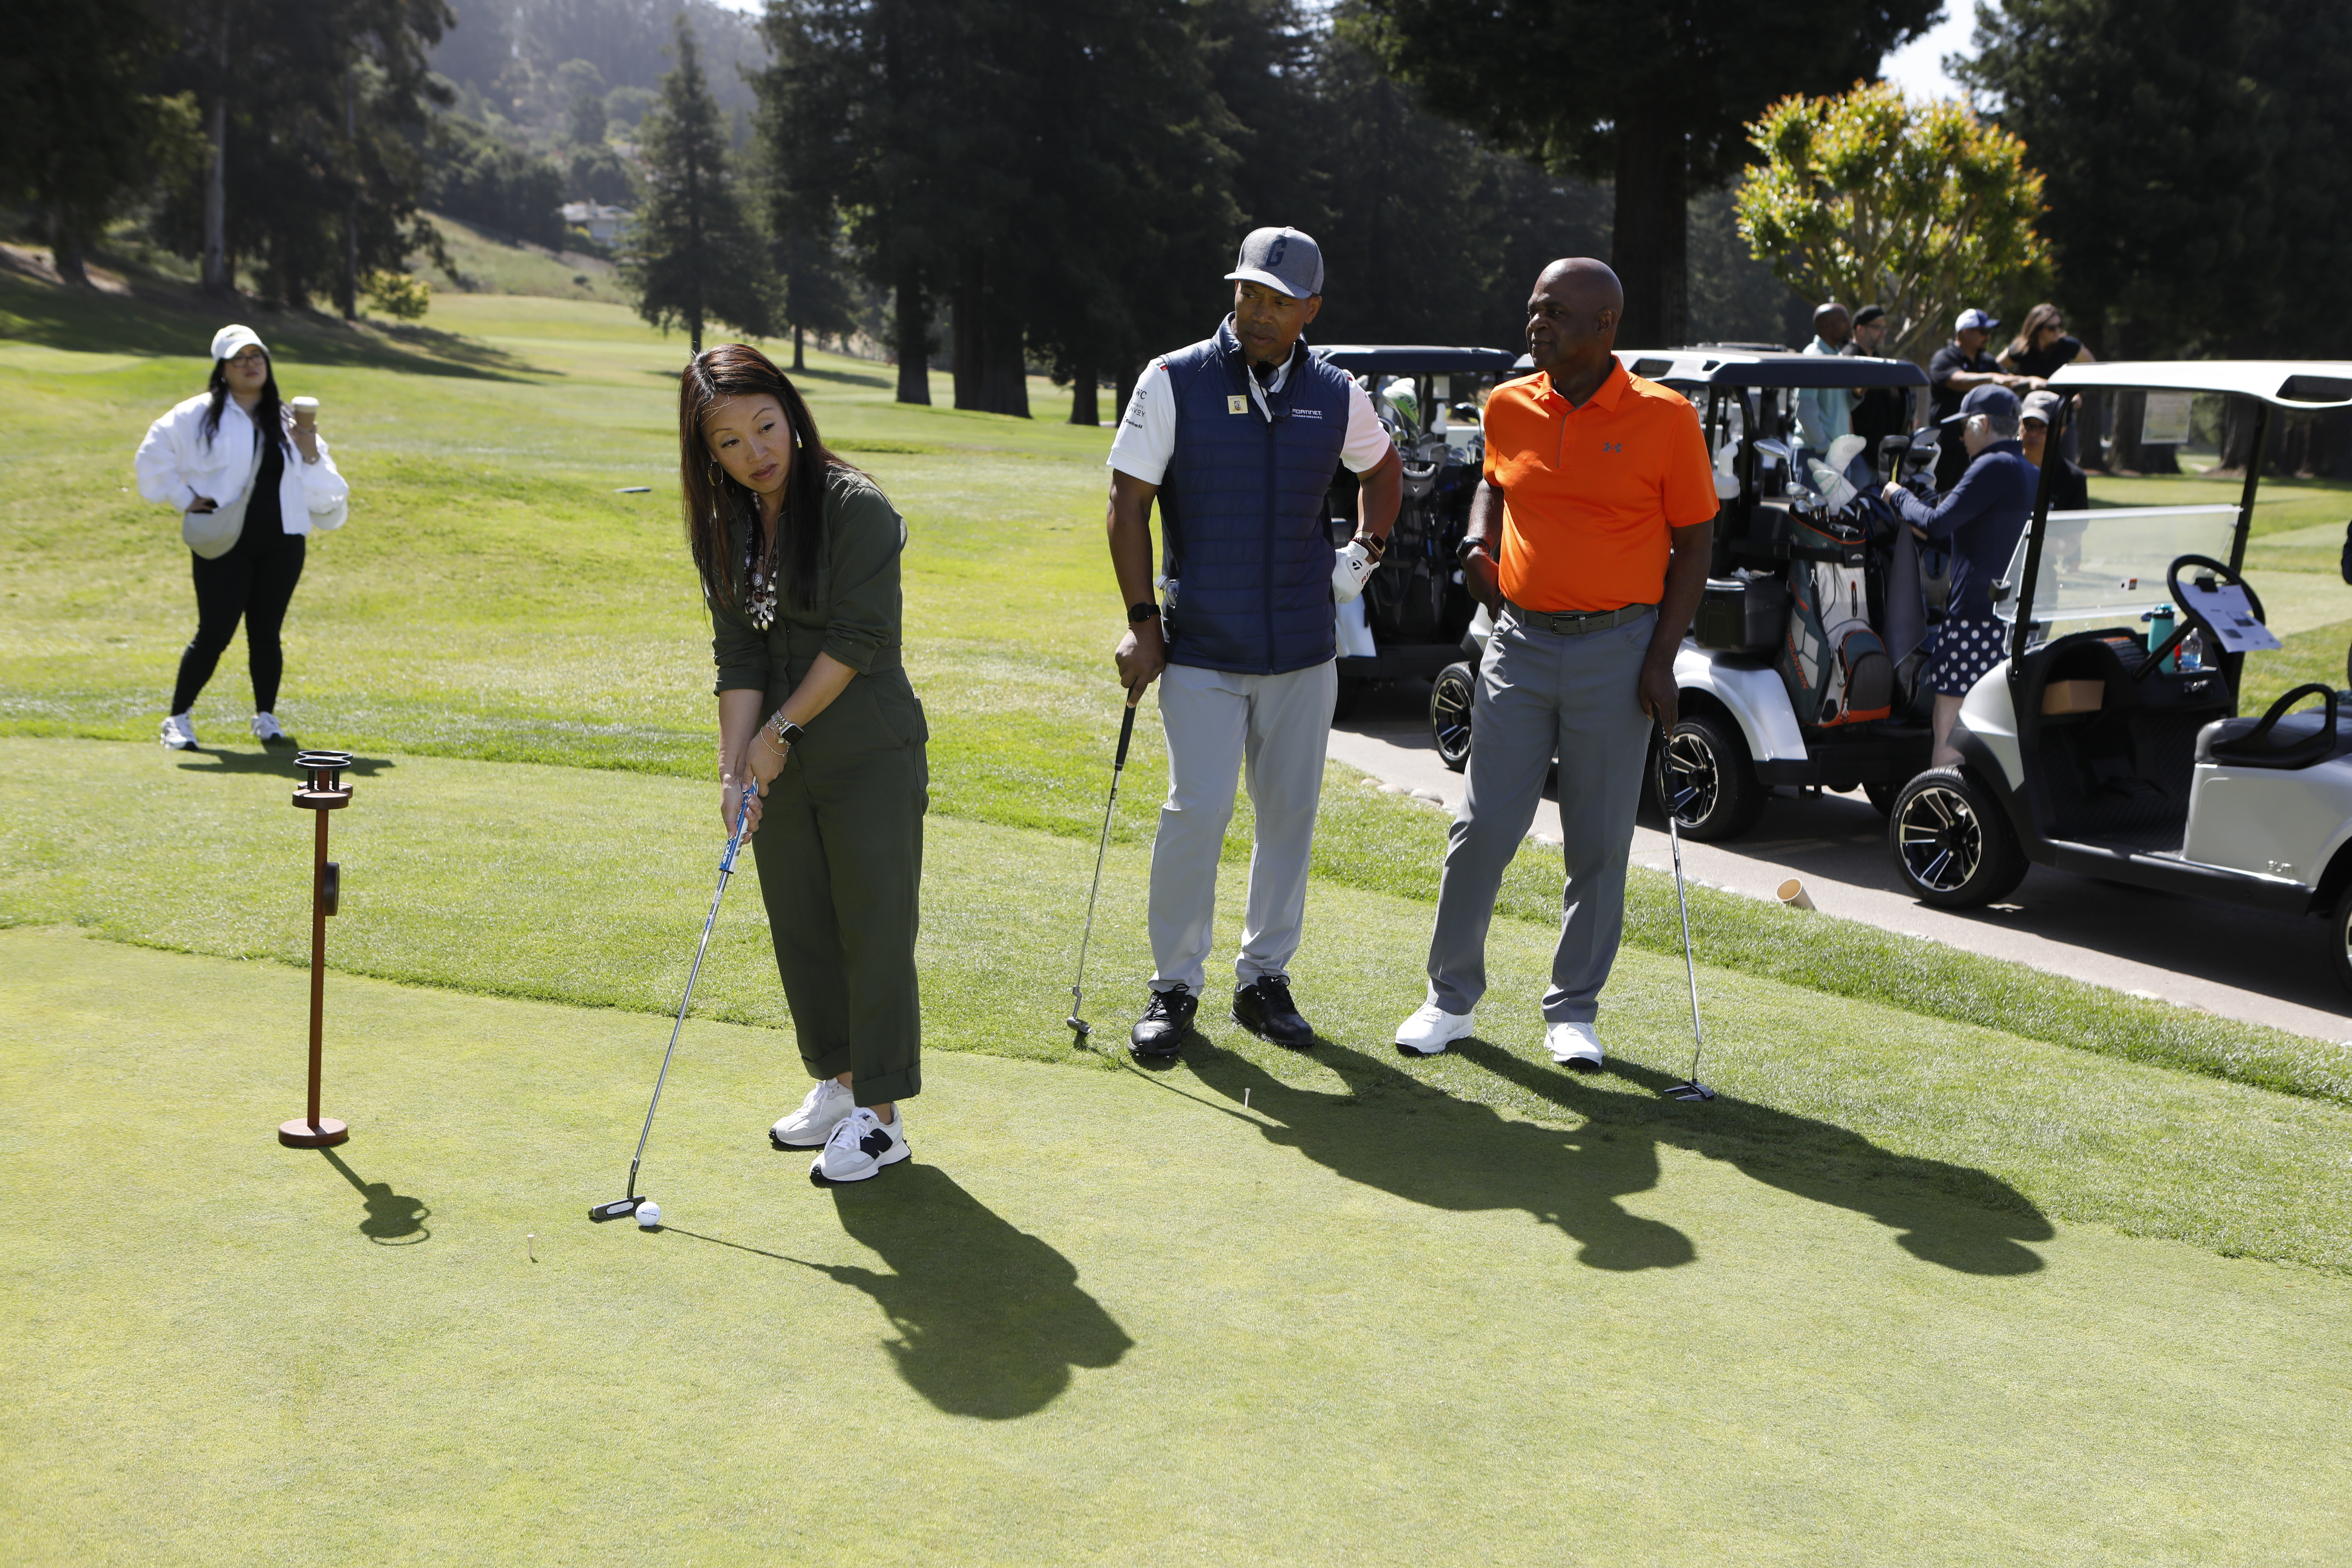 Peralta Chancellor Dr. Tammeil Gilkerson putting at the golf tournament